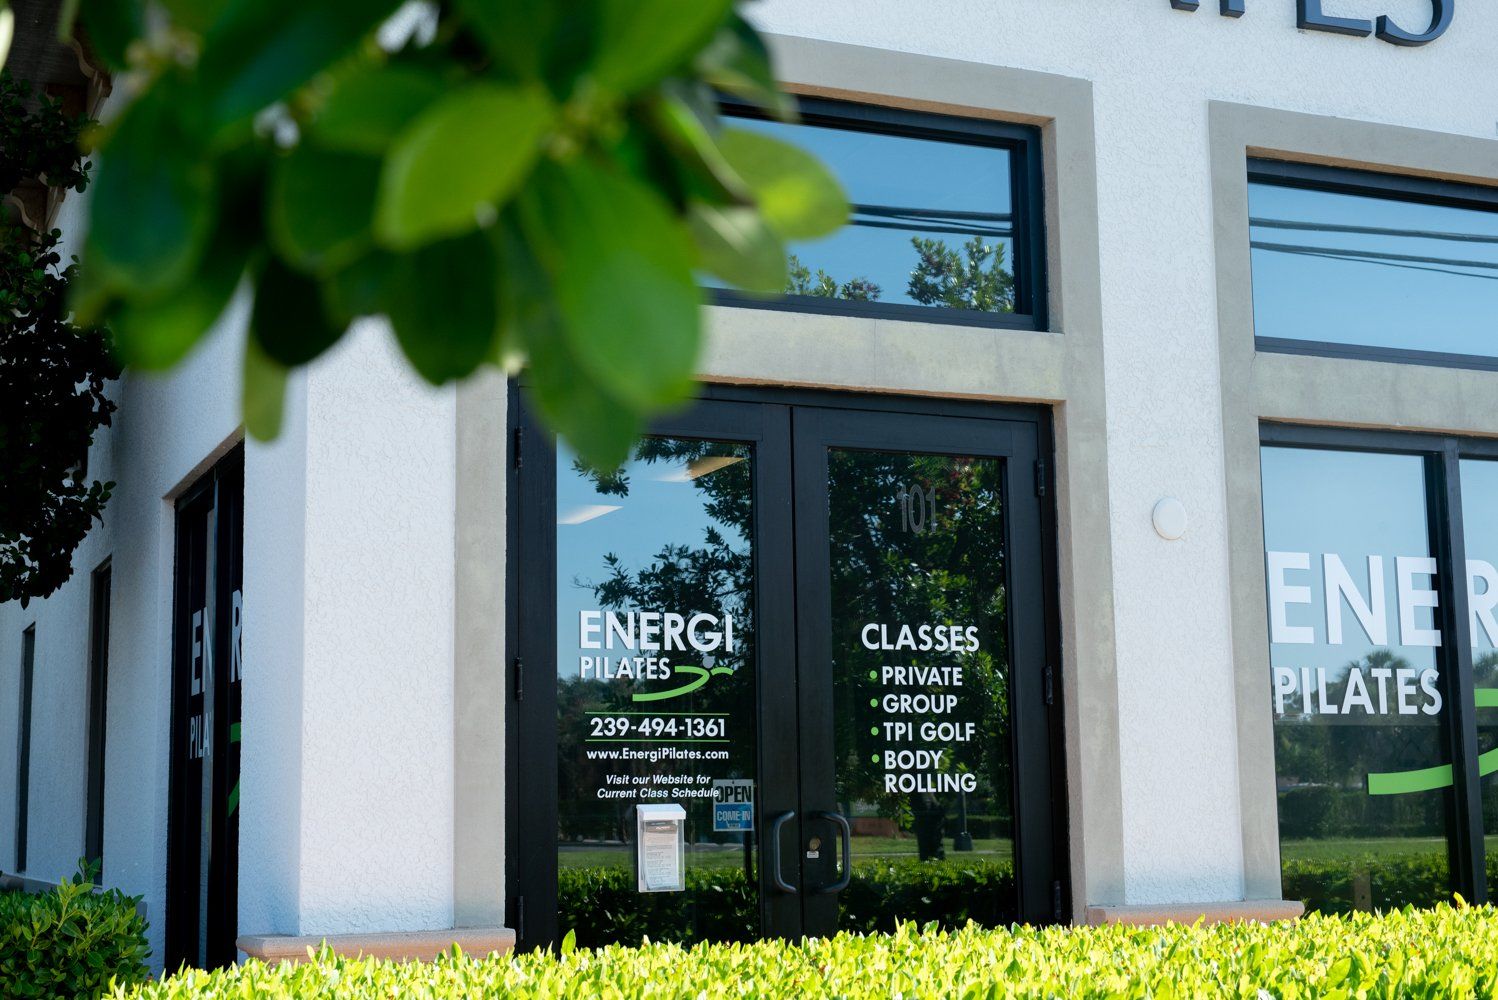 Energi Pilates store front view